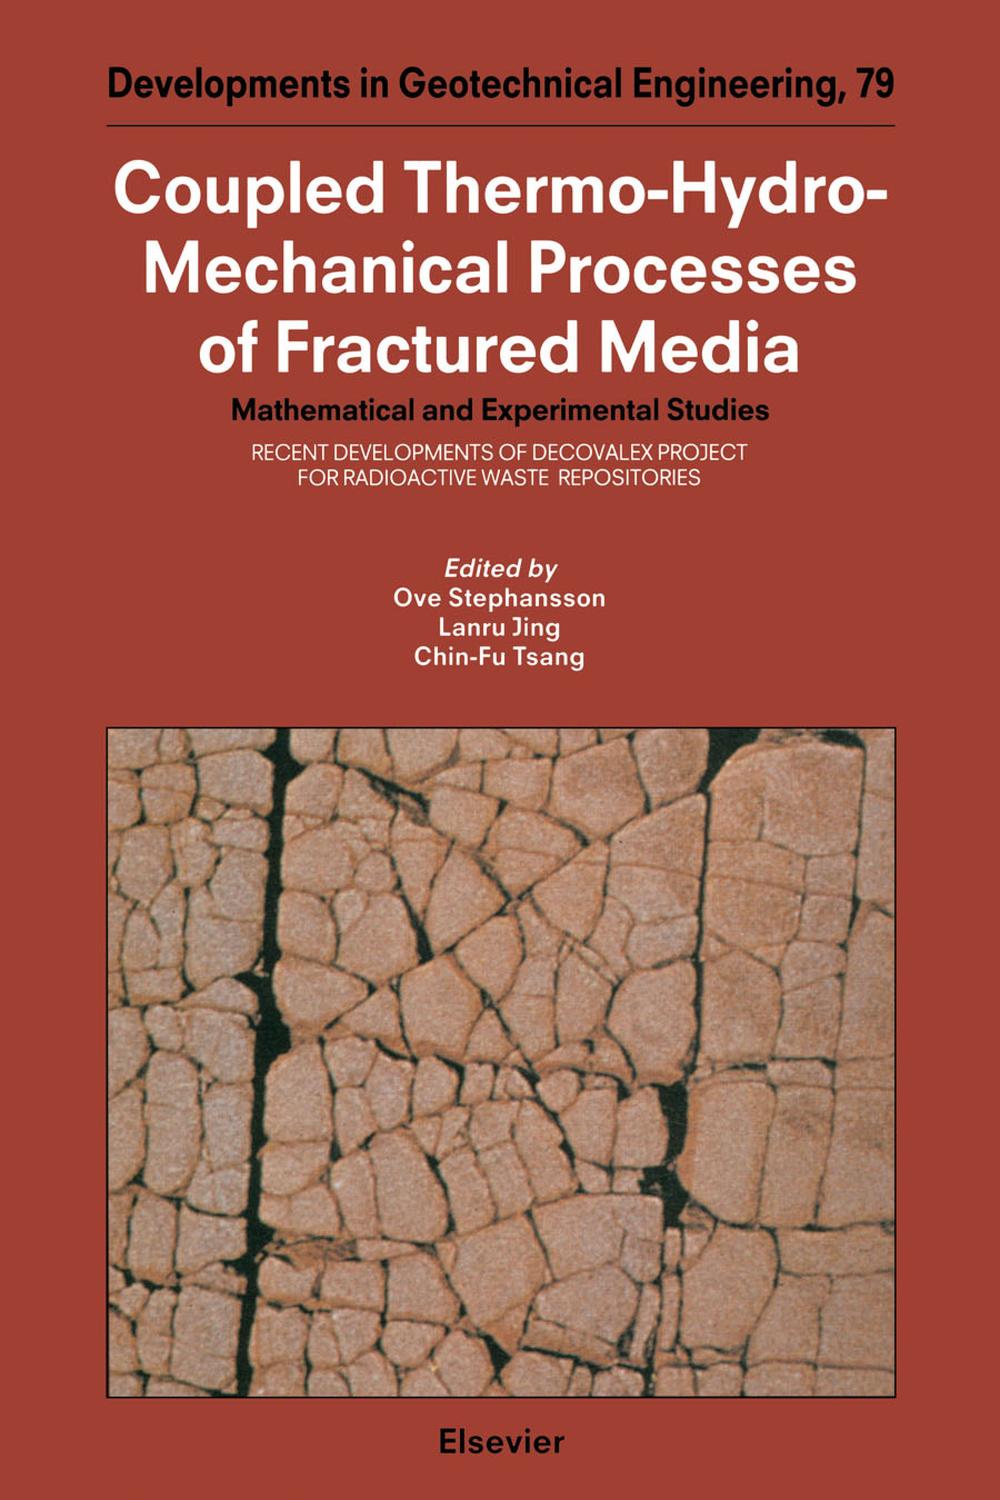 Coupled Thermo-Hydro-Mechanical Processes of Fractured Media - O. Stephanson, L. Jing, C.-F. Tsang